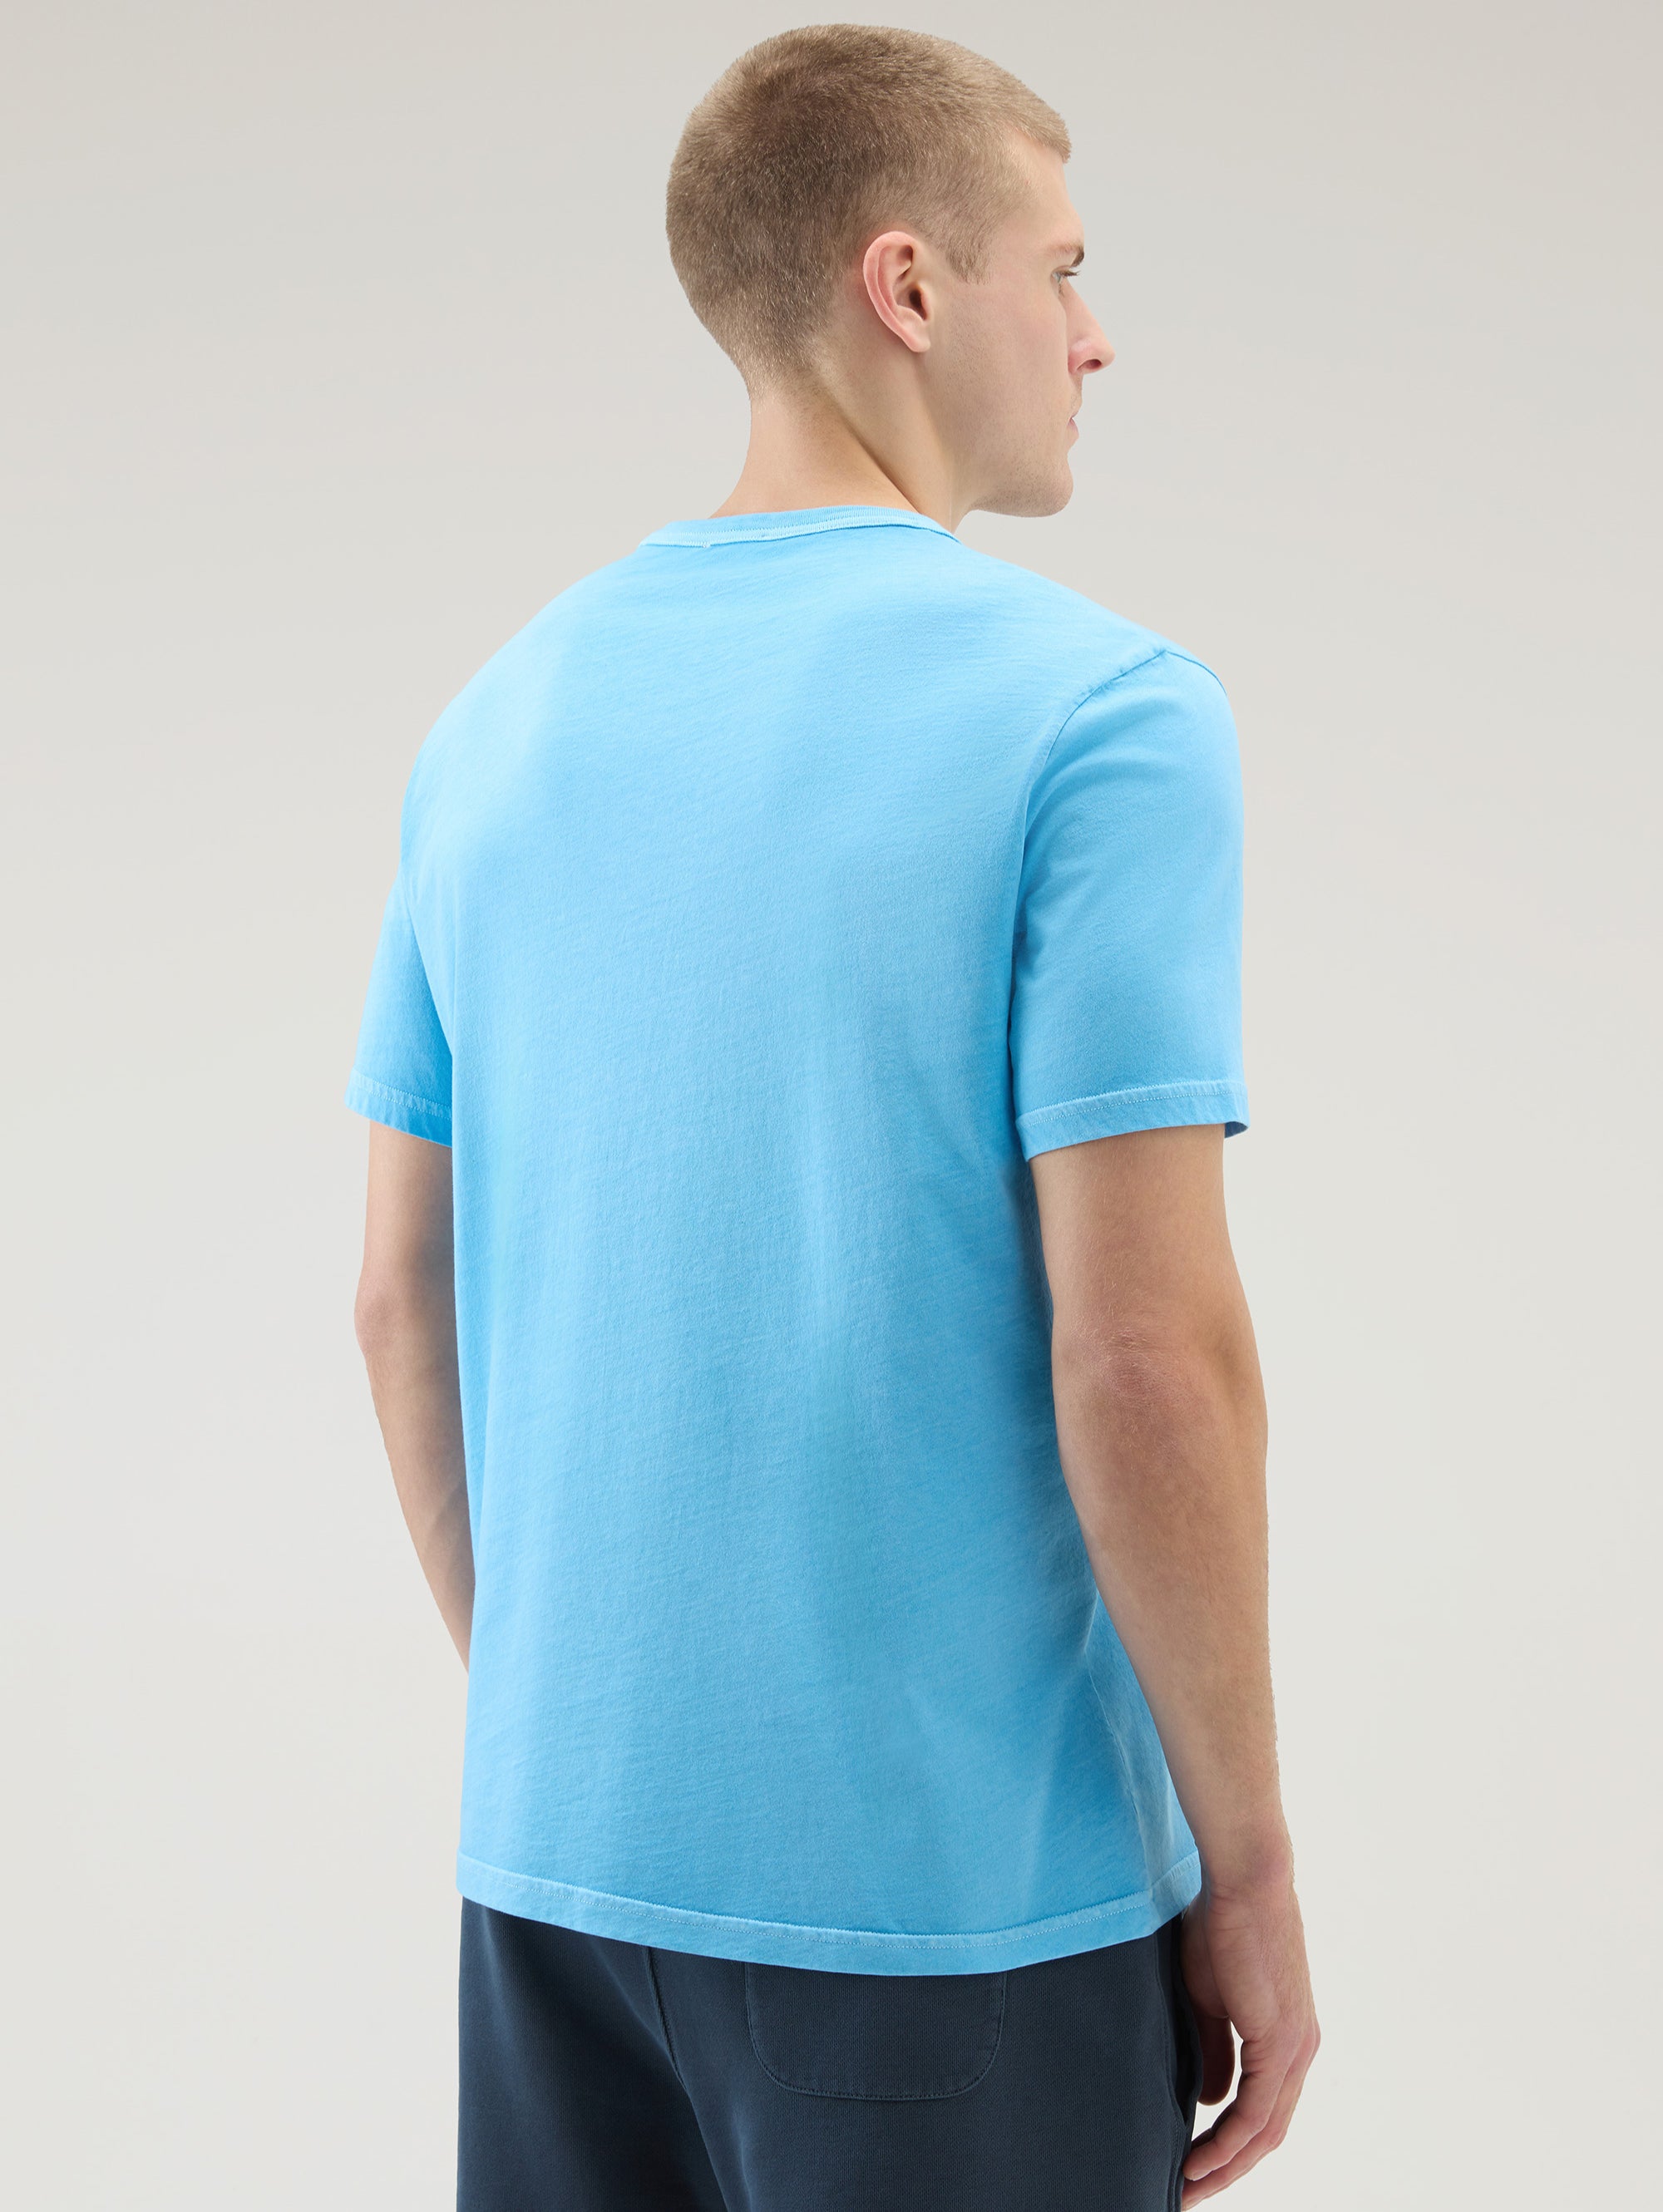 Garment-dyed T-shirt with Blue Print